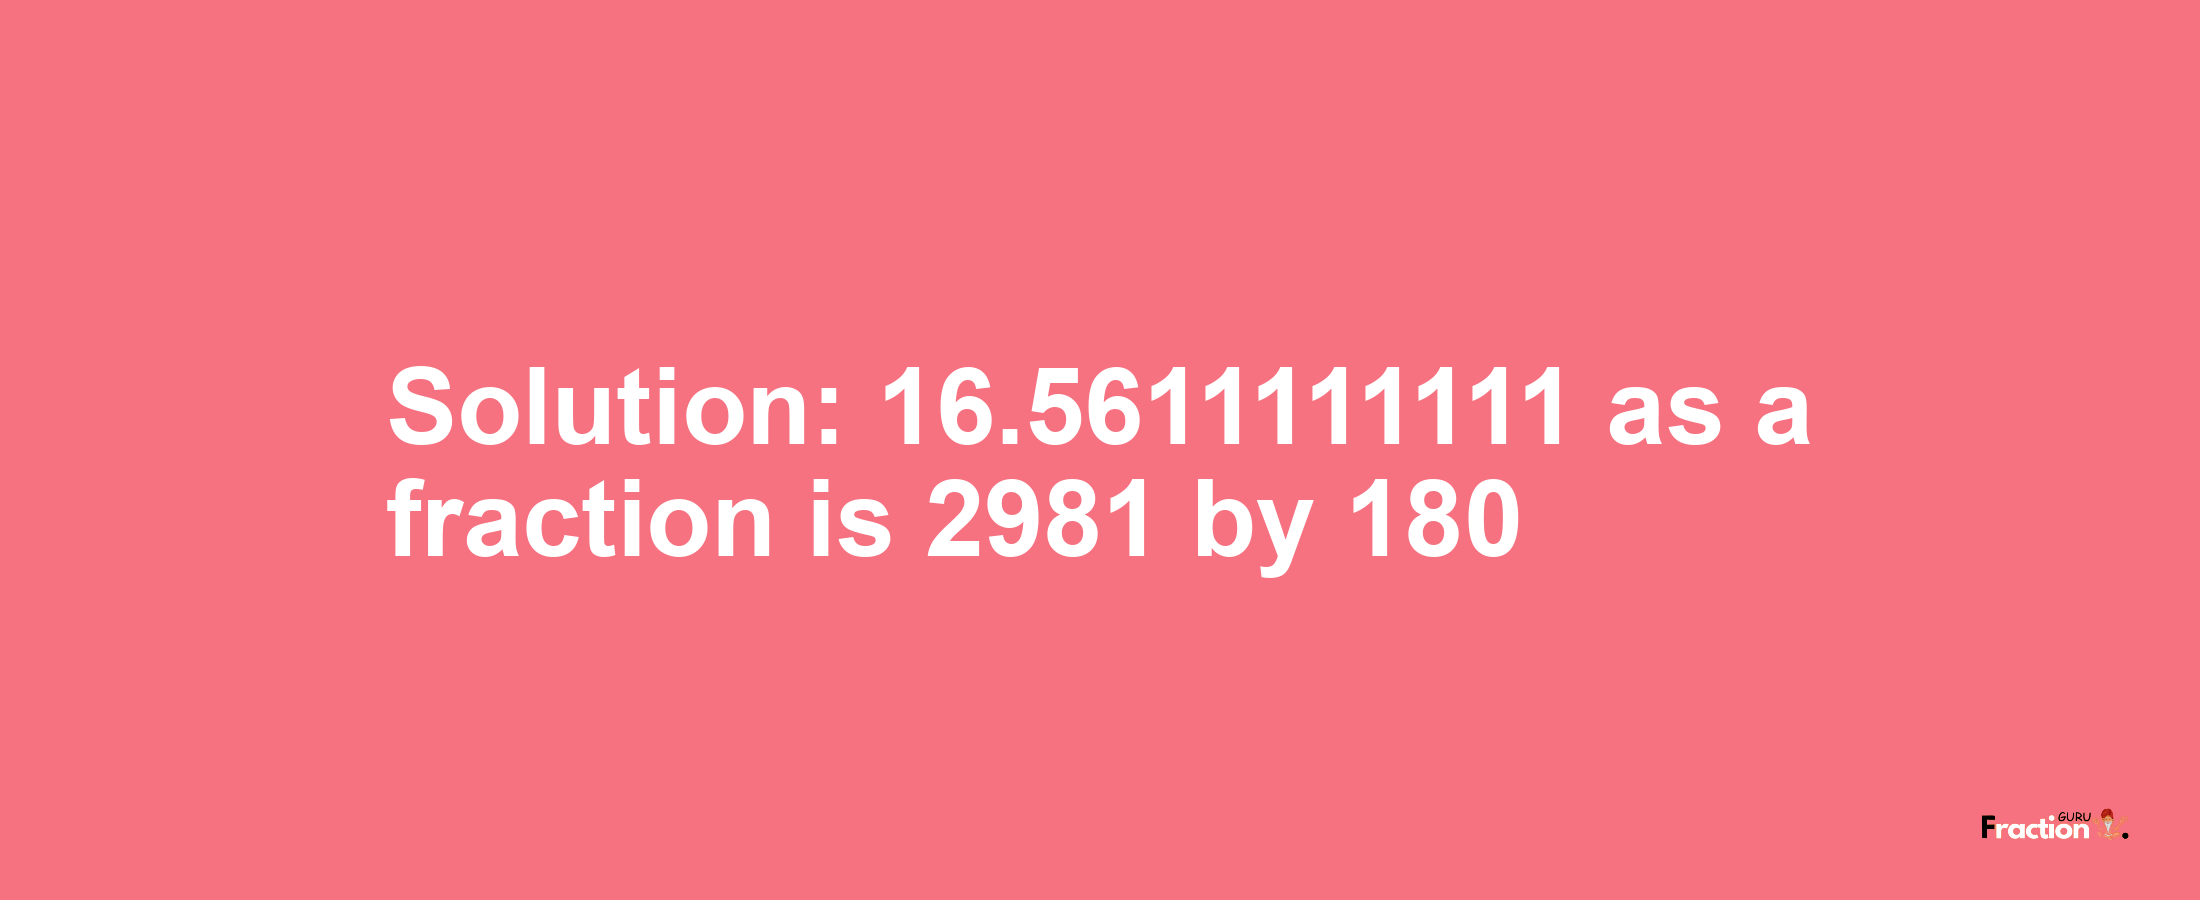 Solution:16.5611111111 as a fraction is 2981/180